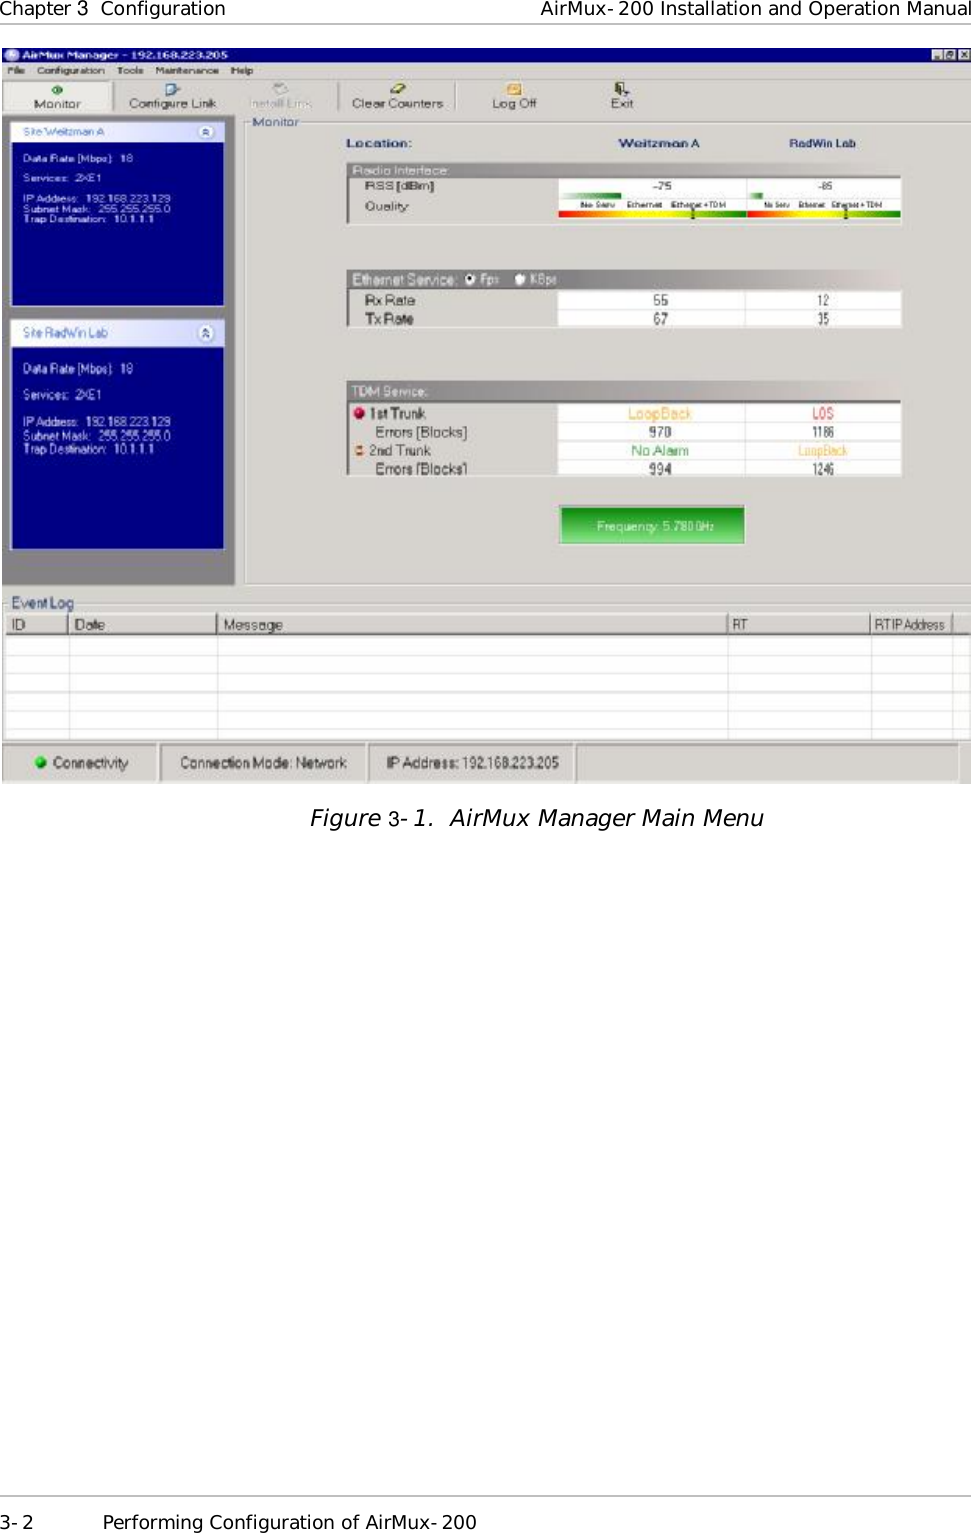 Chapter   3  Configuration AirMux-200 Installation and Operation Manual 3-2 Performing Configuration of AirMux-200   Figure   3-1.  AirMux Manager Main Menu 